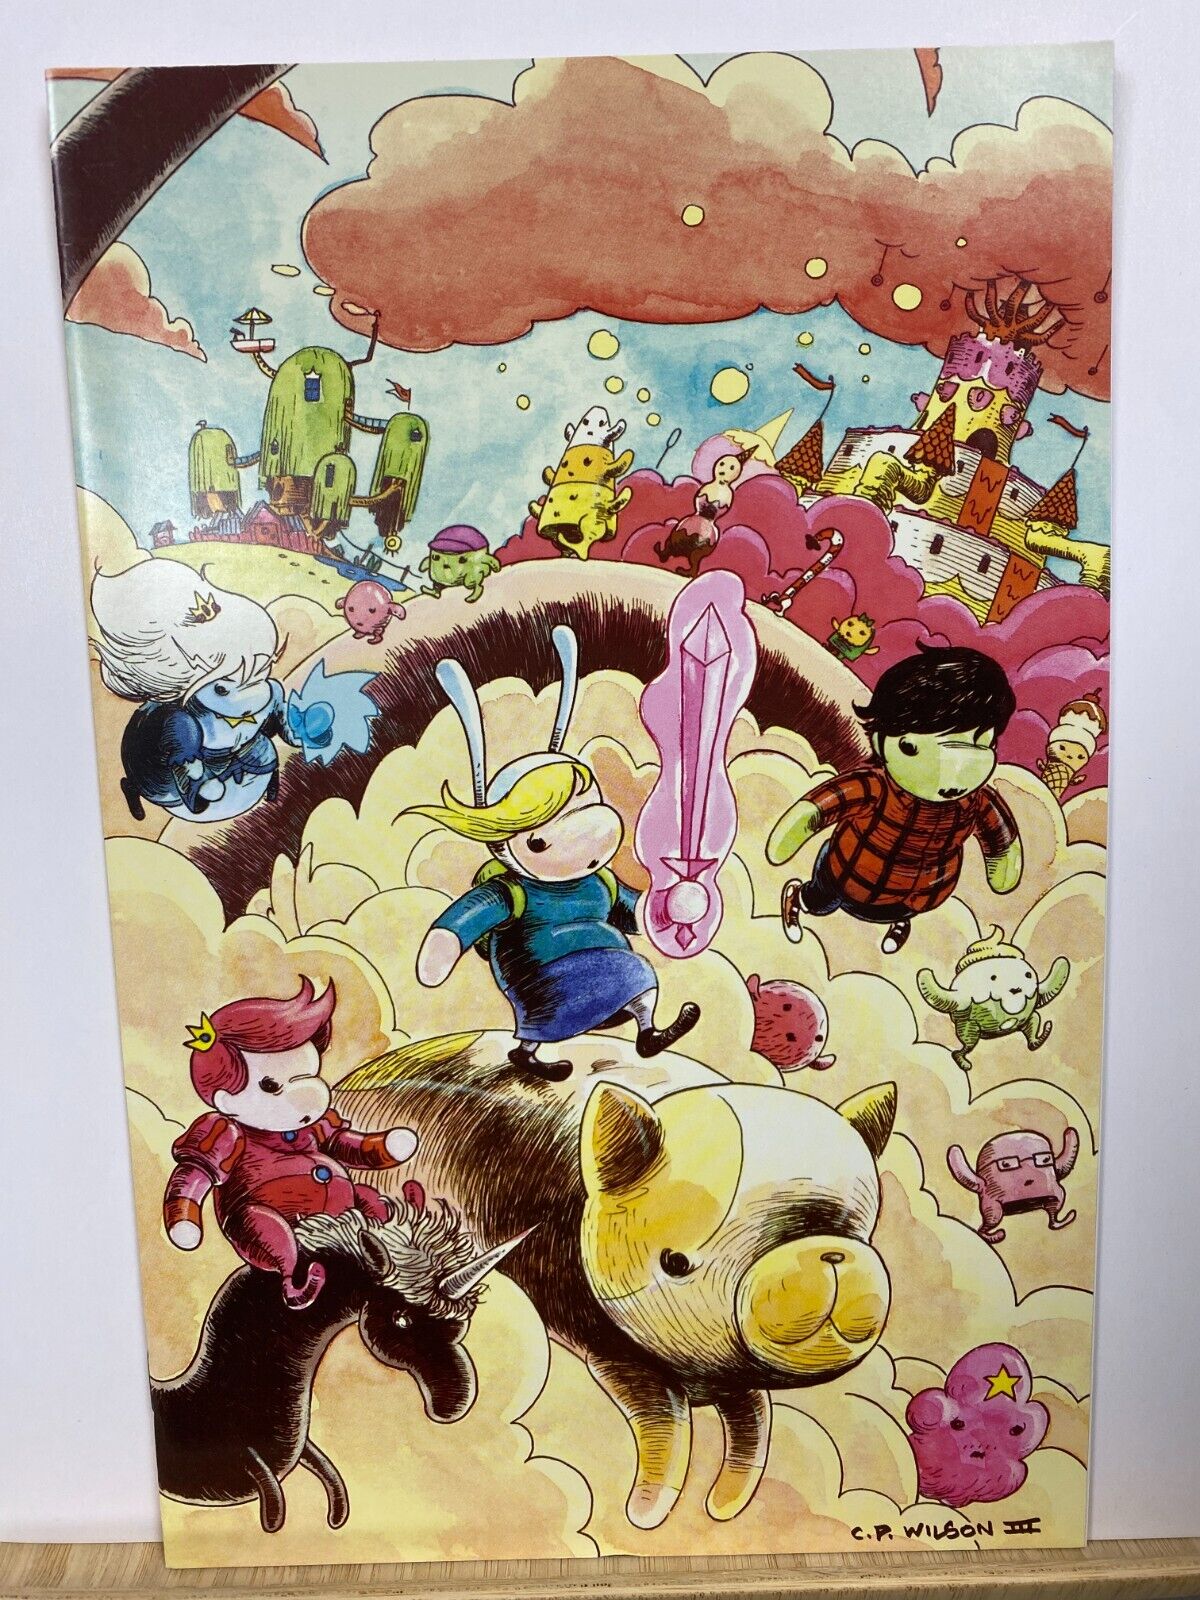 Adventure Time: Fionna & Cake #2 phantom project exclusive variant NM/NM-